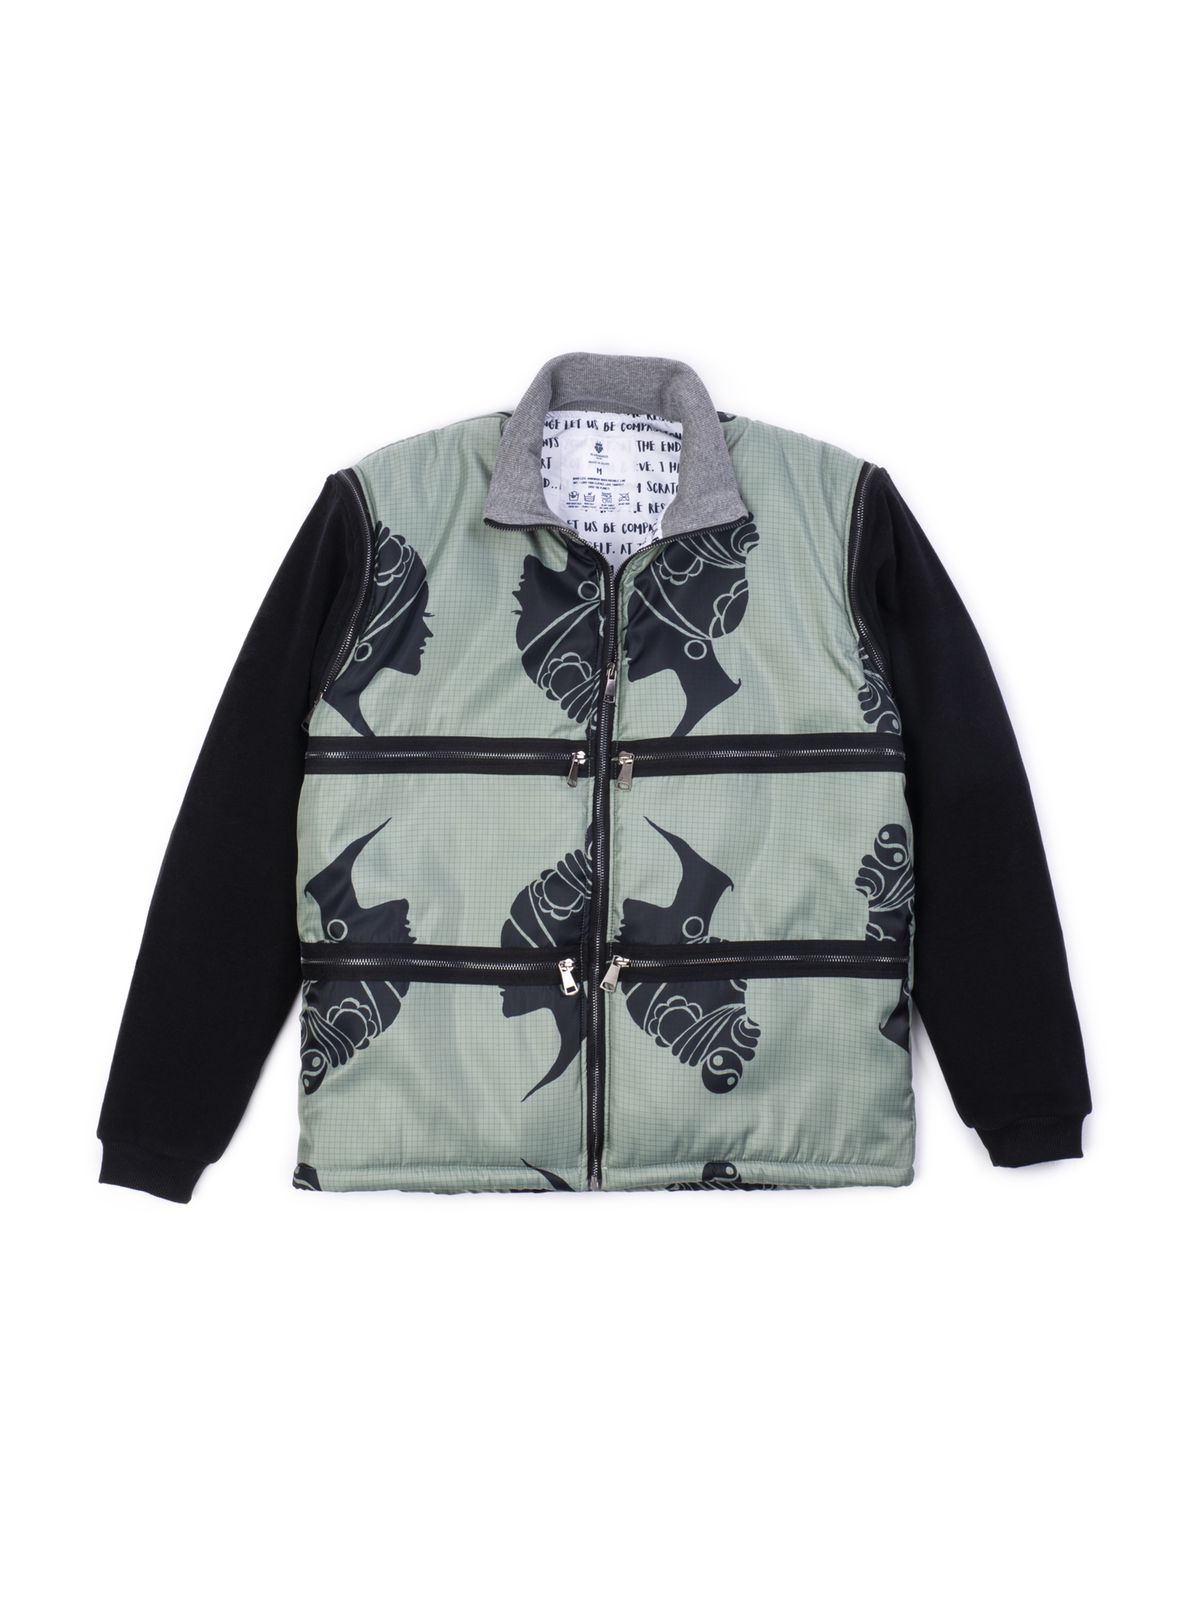 Louis Vuitton Utility Jackets For Mentally